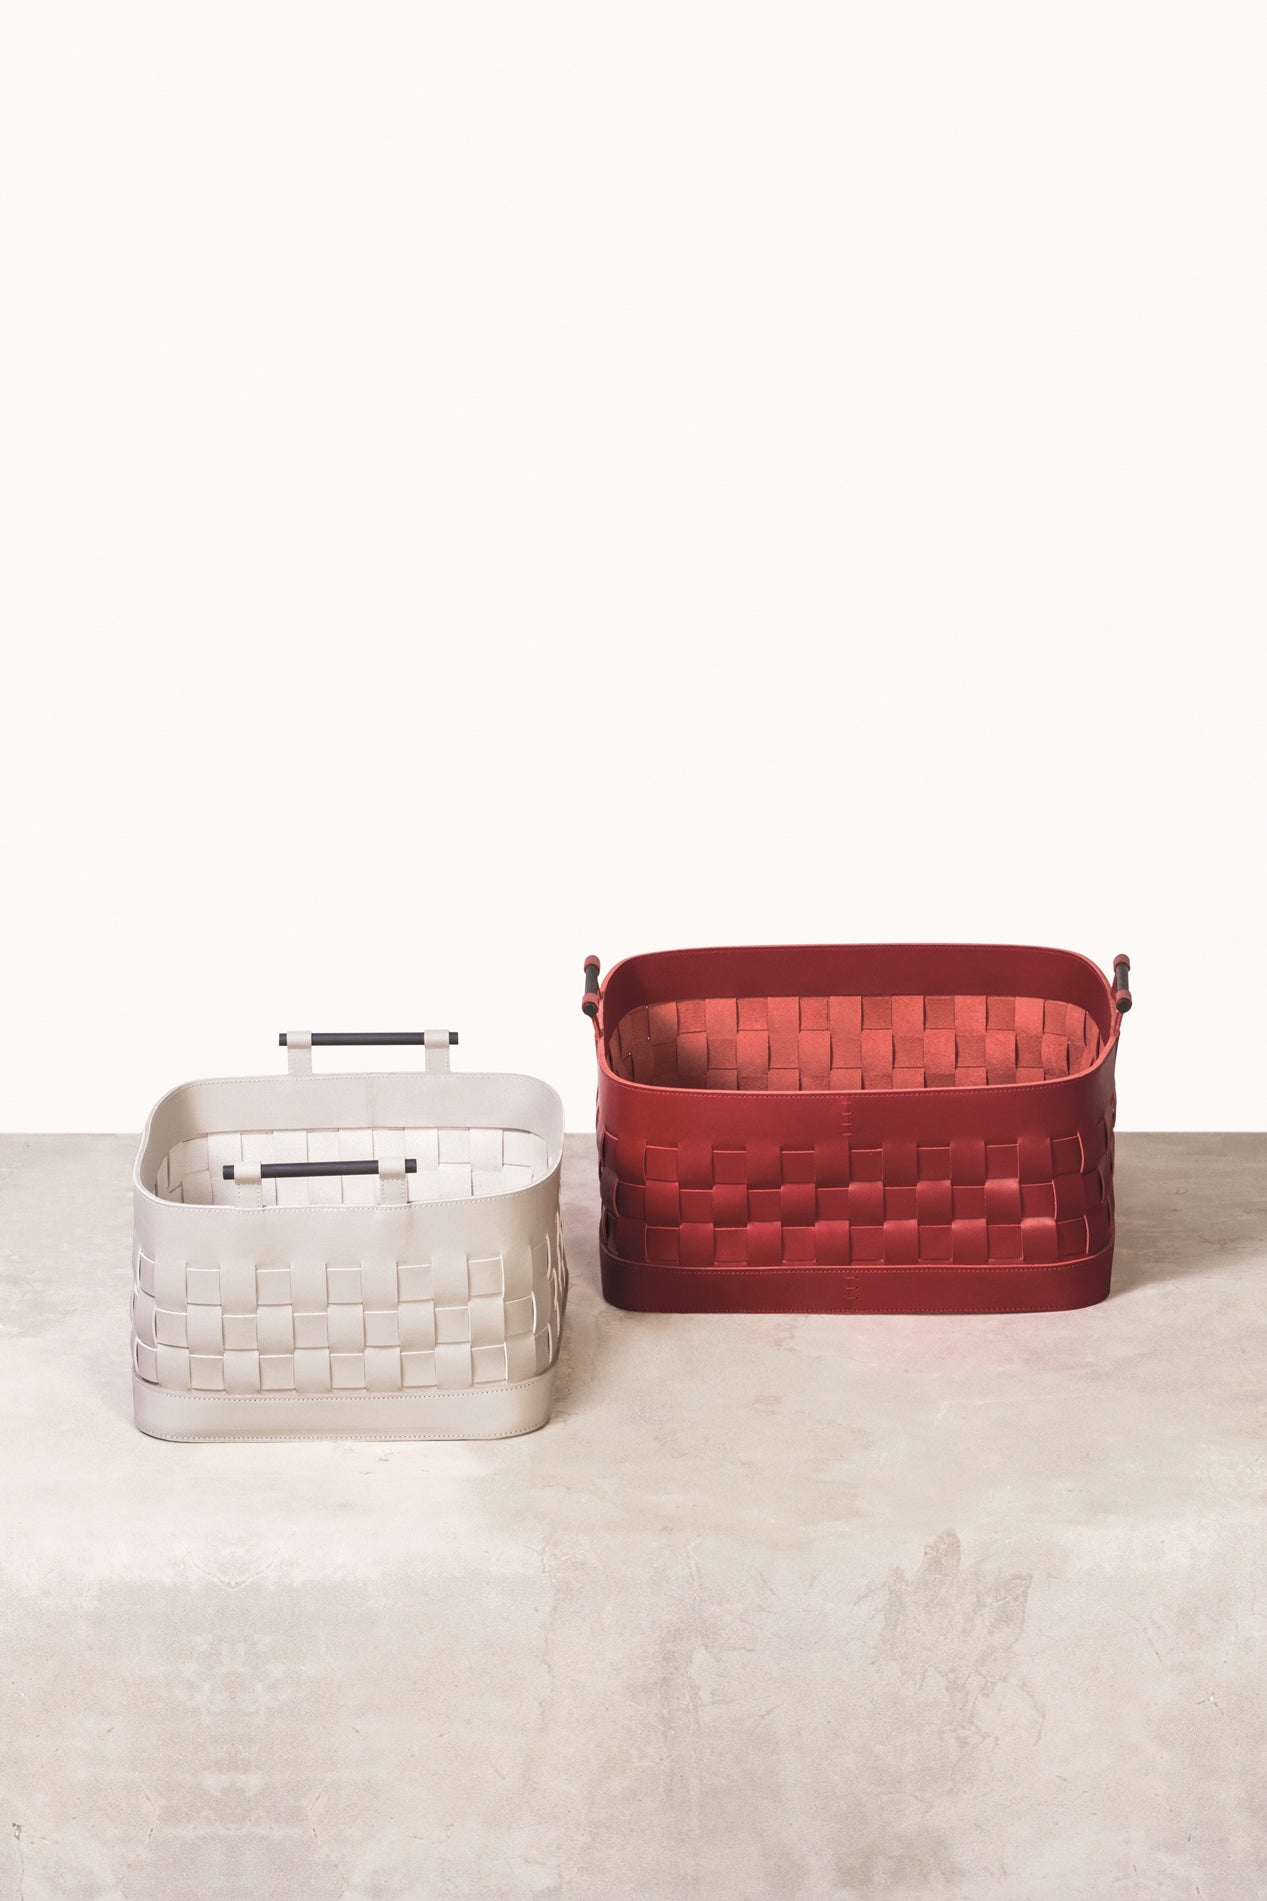 Rabitti 1969 Ravenna Square Braided Leather Storage Basket | Elegant and Functional Storage Solution | Crafted with High-Quality Leather | Brushed Bronze Handles for a Touch of Luxury | Explore a Range of Luxury Home Accessories at 2Jour Concierge, #1 luxury high-end gift & lifestyle shop